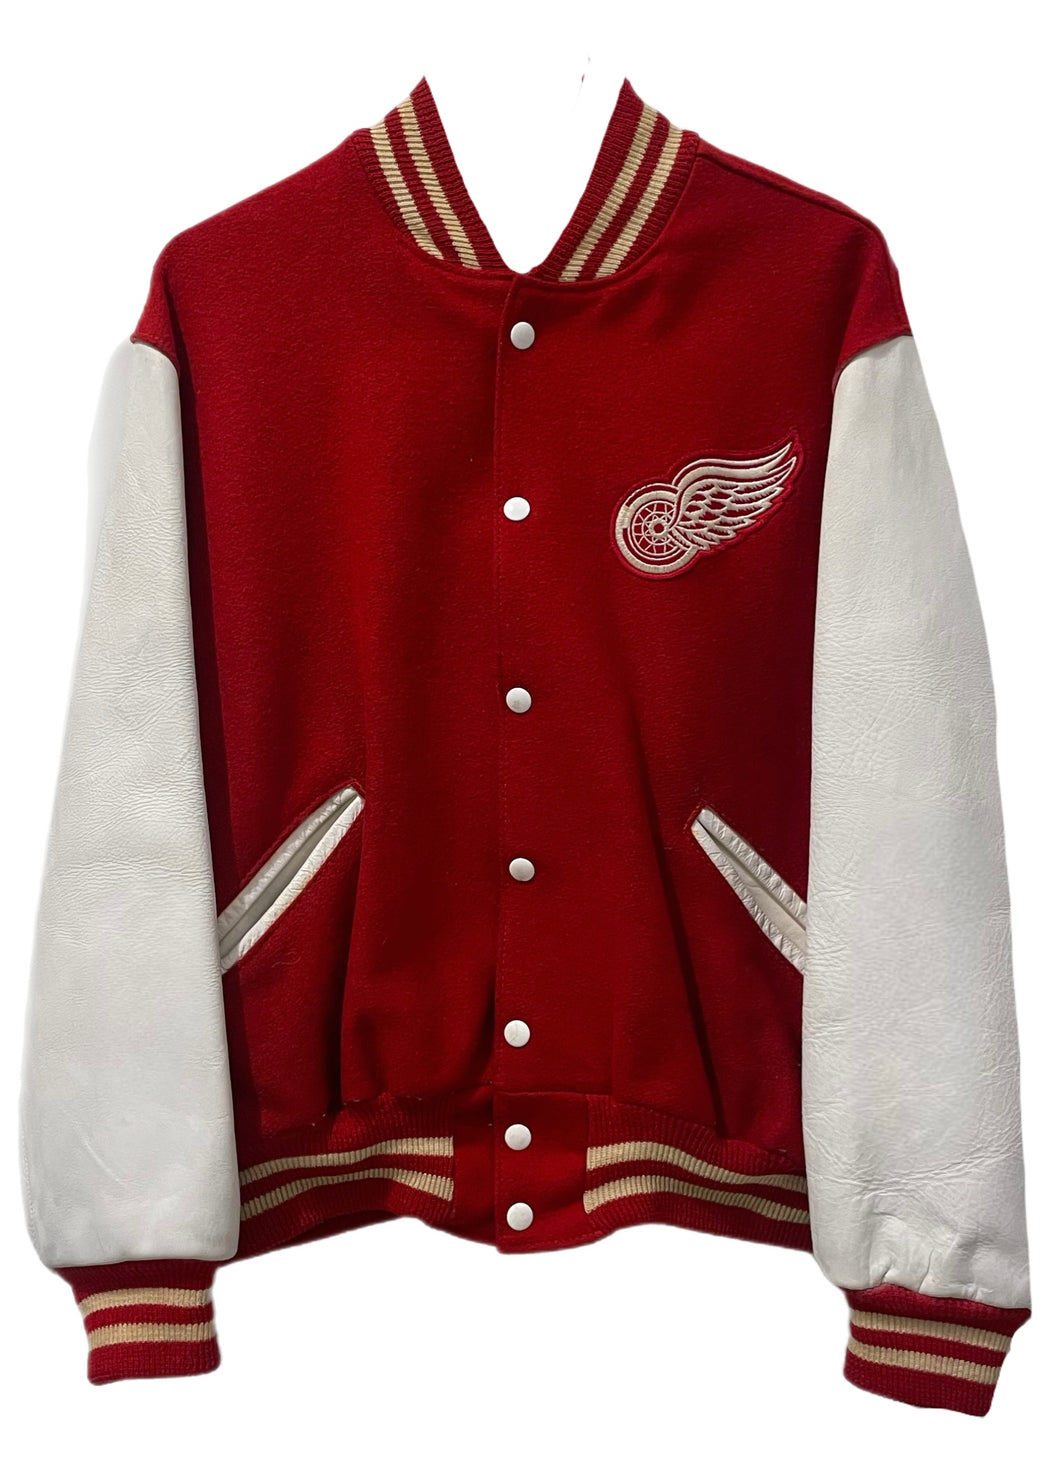 Detroit Red Wings, Hockey One of a KIND Vintage Jacket with Crystal Star Design